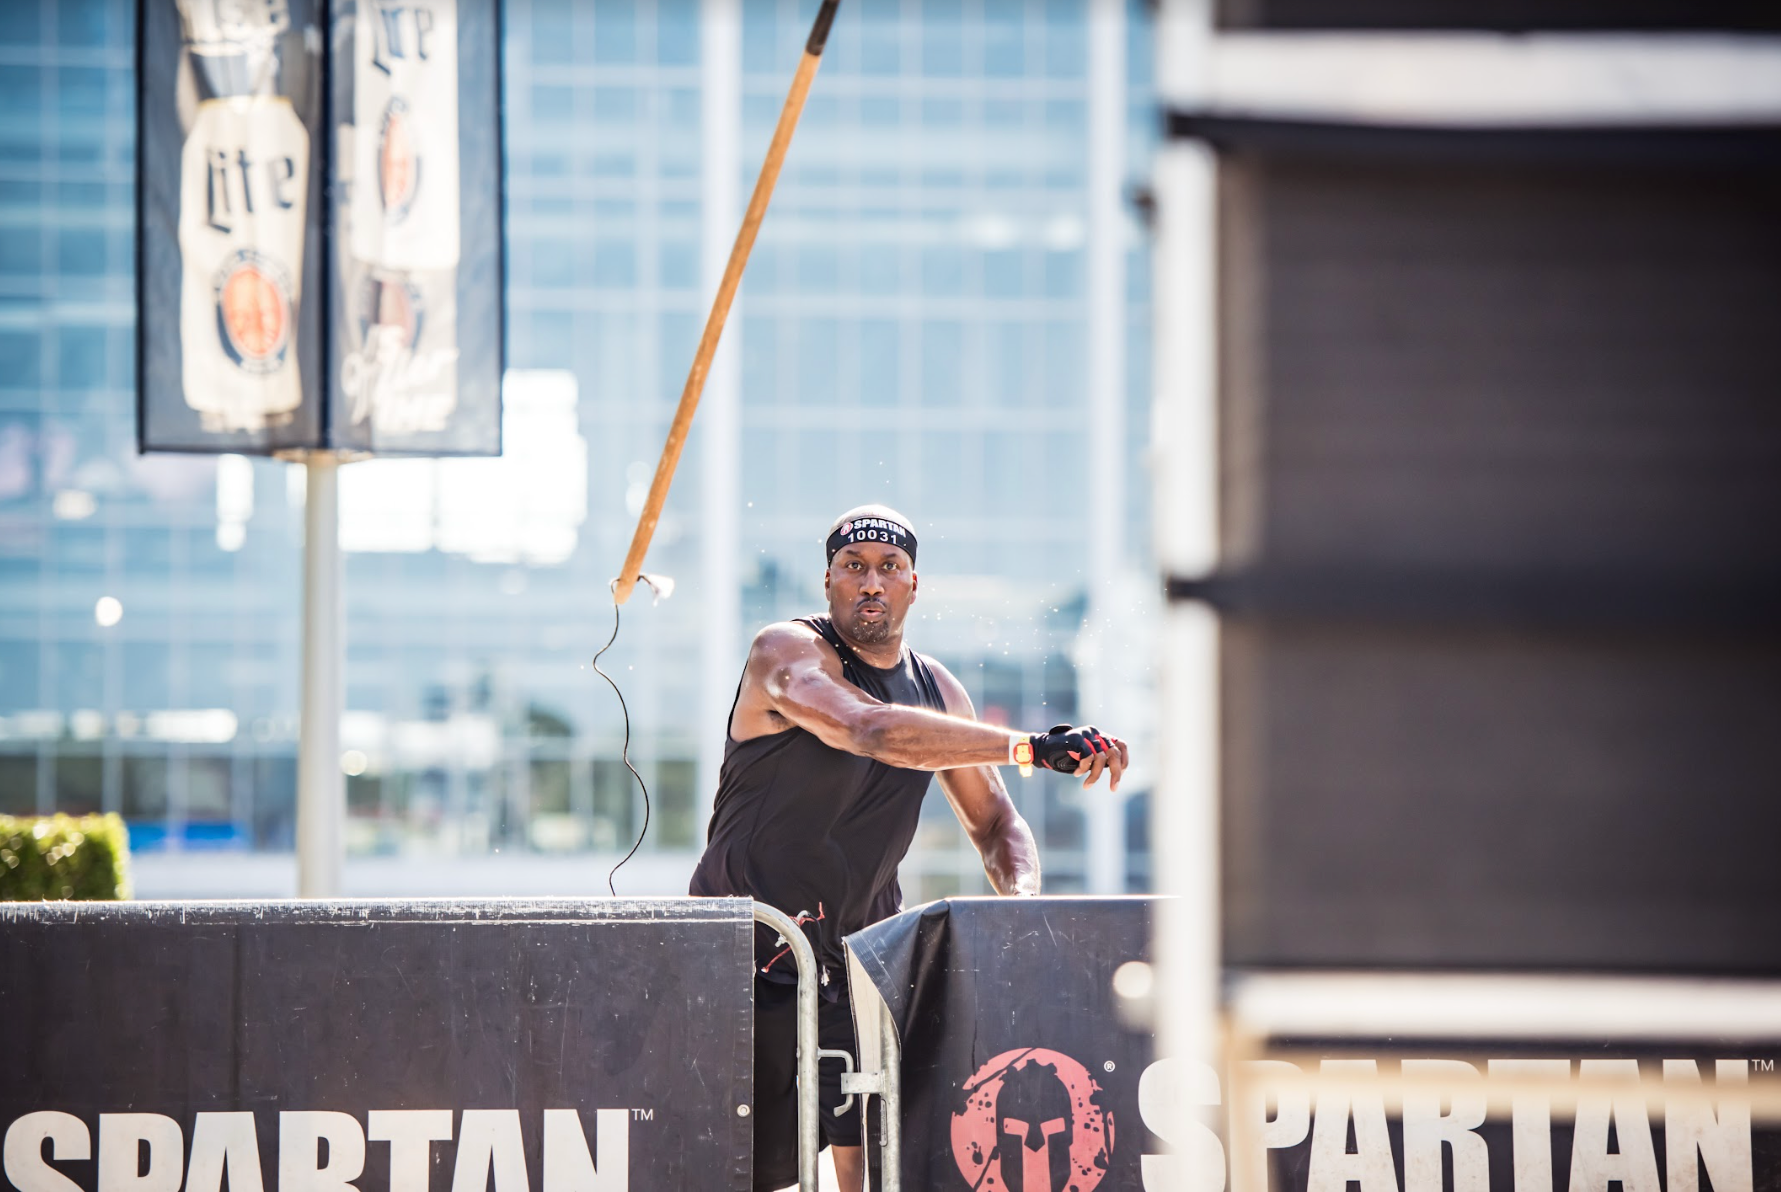 a spartan racer completing the spear throw obstacle at a stadion race